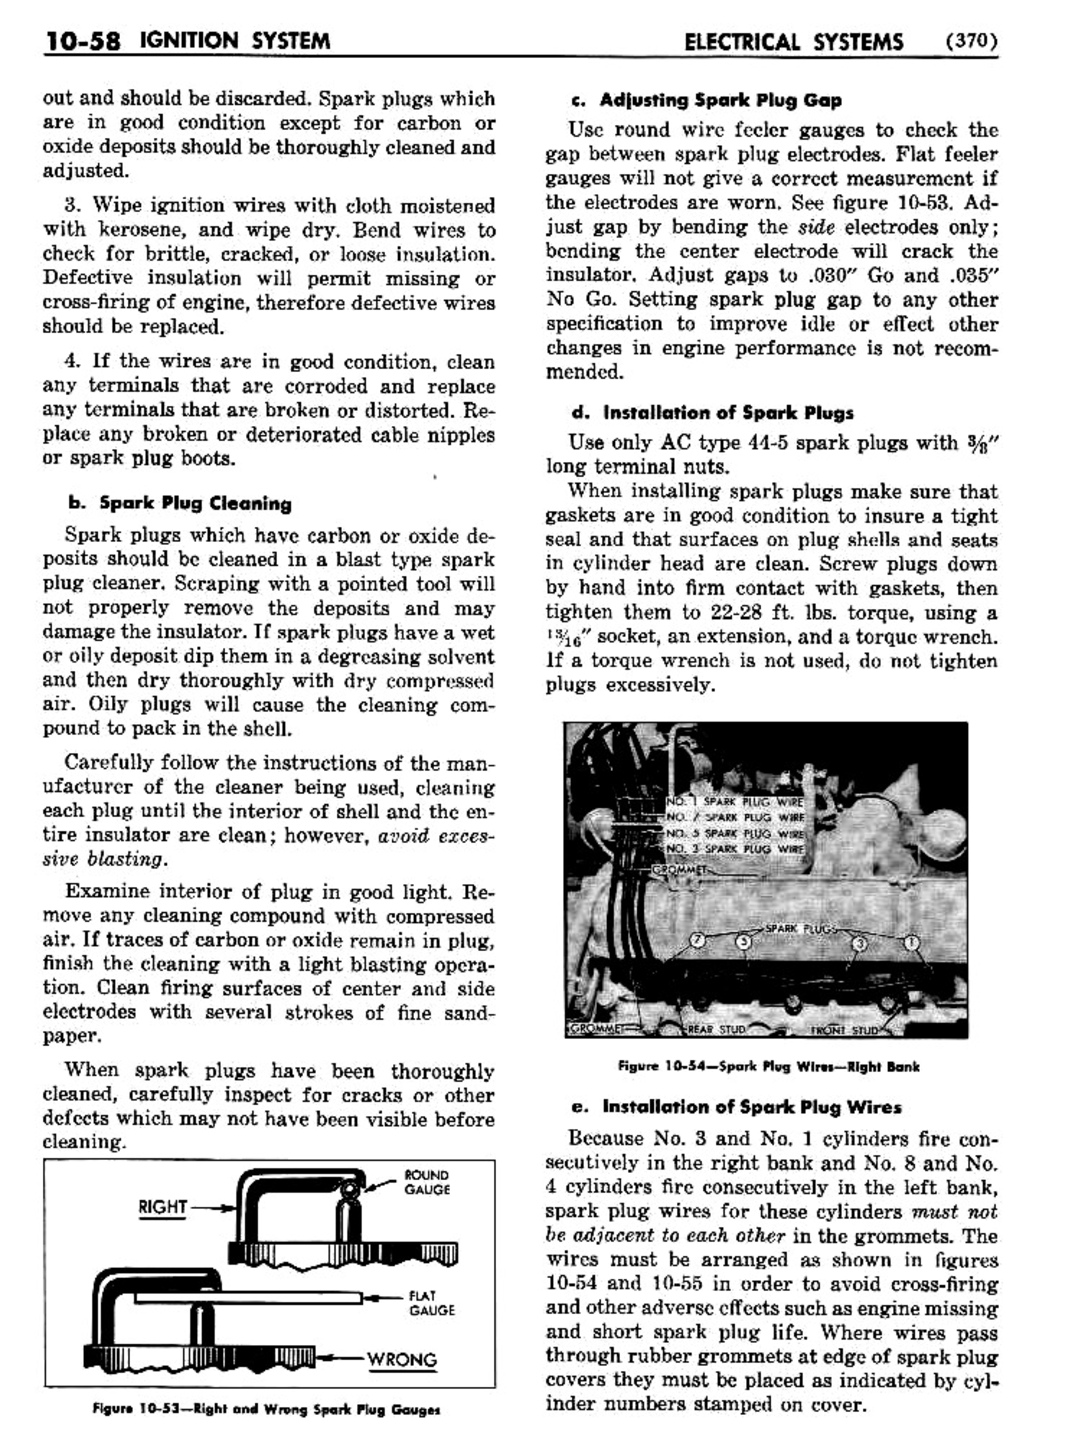 n_11 1954 Buick Shop Manual - Electrical Systems-058-058.jpg